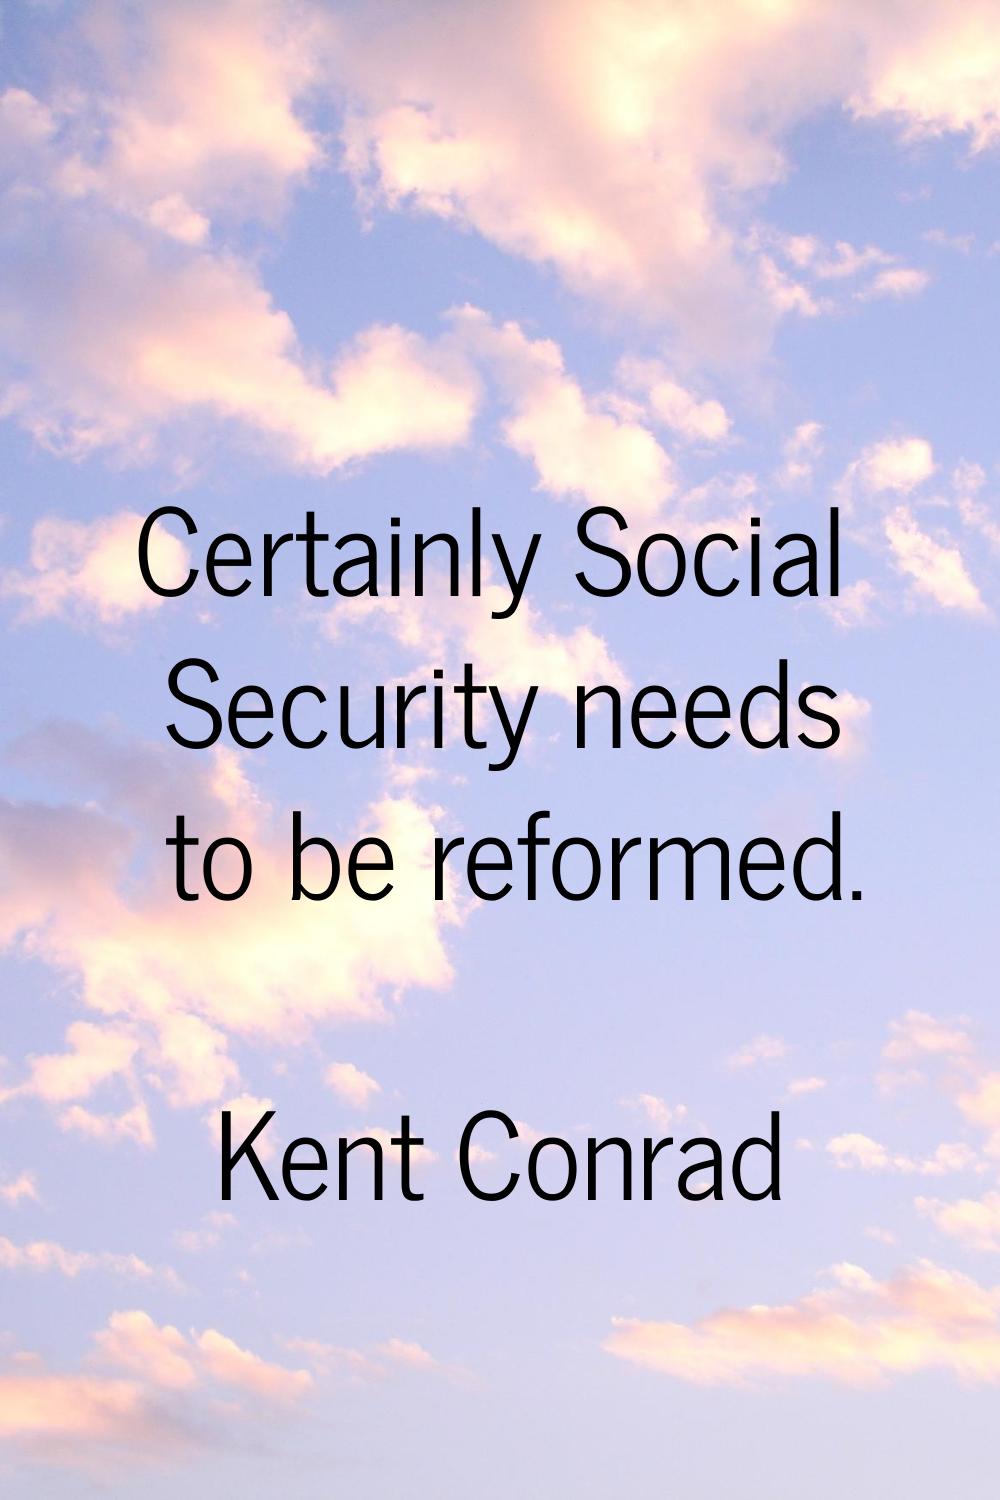 Certainly Social Security needs to be reformed.